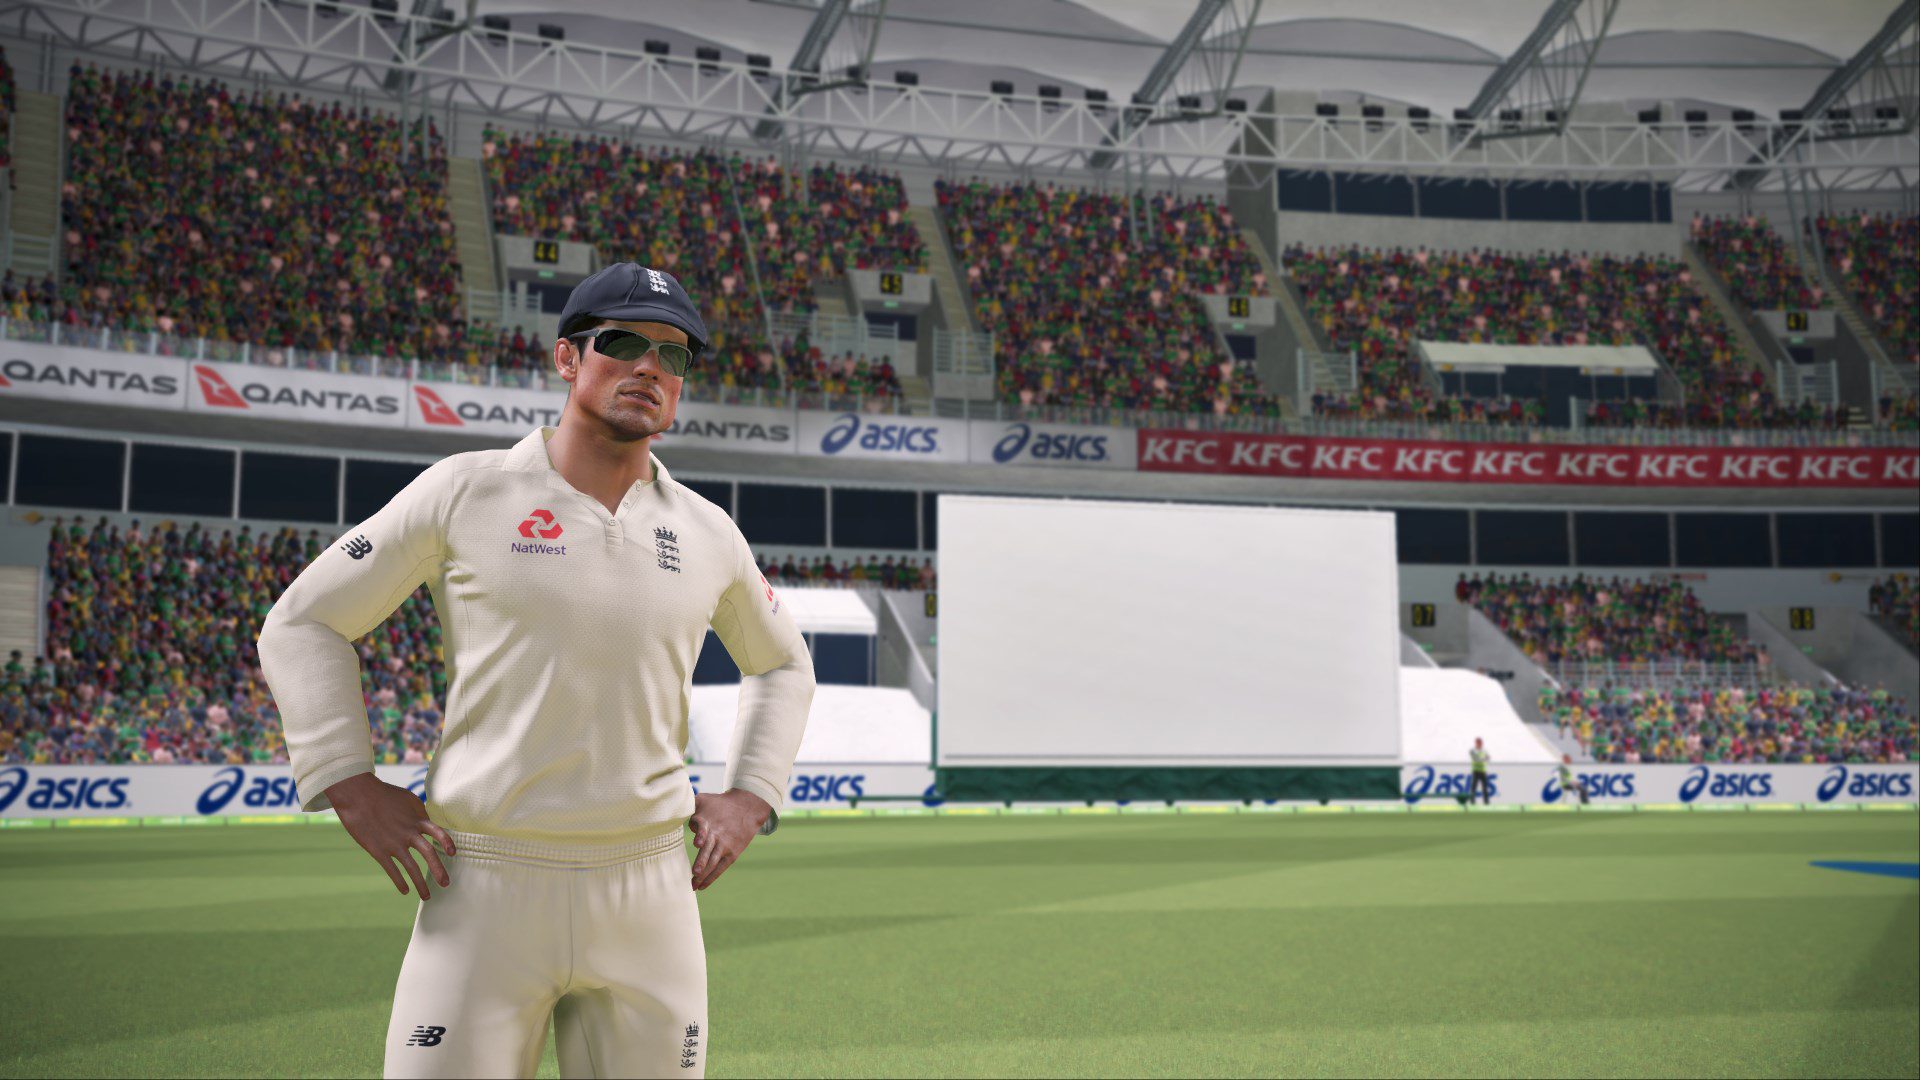 REVIEW : ASHES CRICKET (PS4/ PS4 Pro)